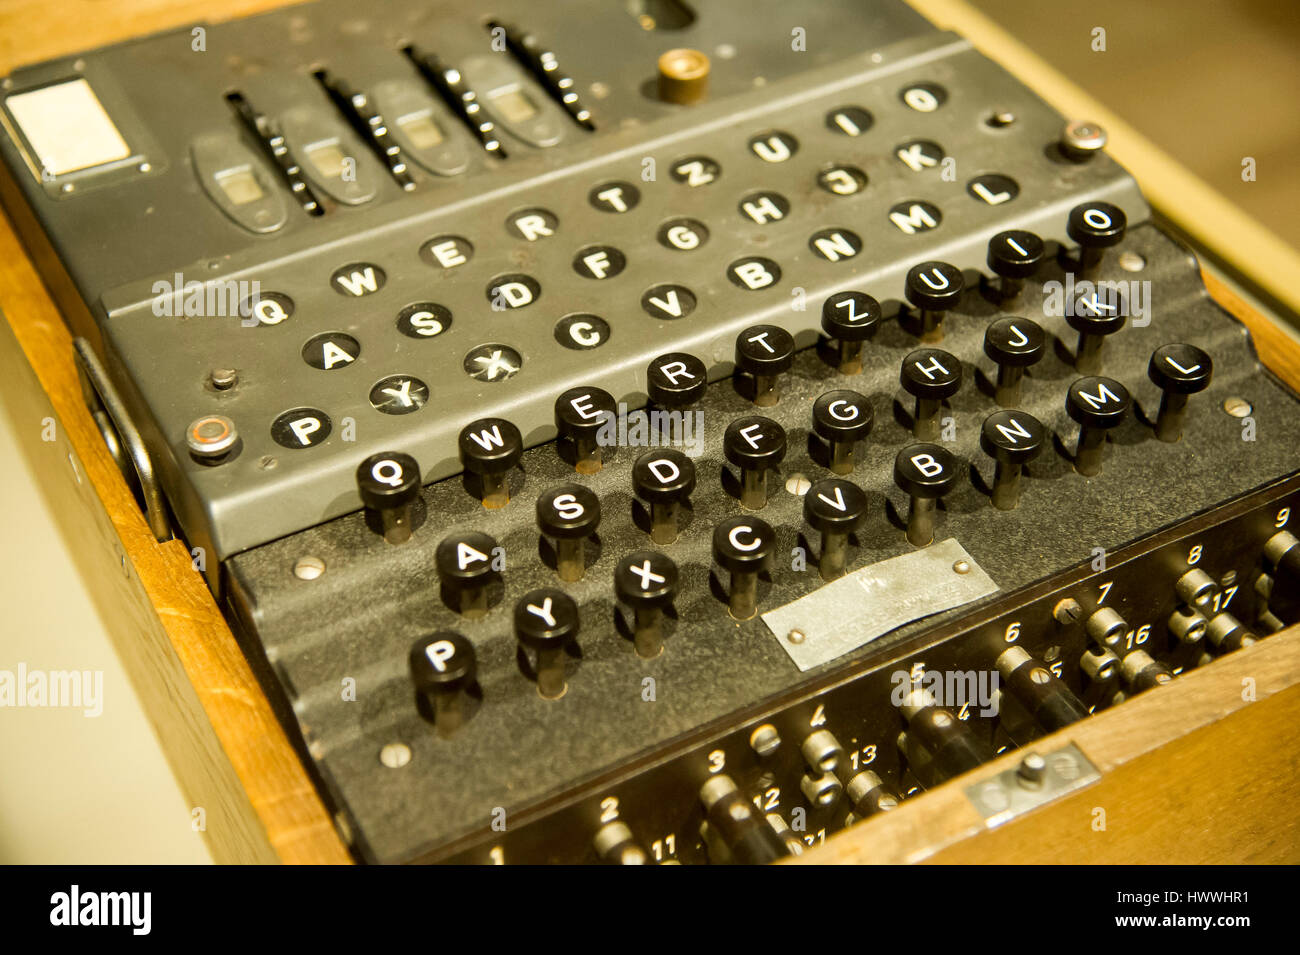 Gdansk, Poland. 23rd March, 2017. Gdansk, Poland. 23rd Mar, 2017. Enigma machine, German electro mechanical rotor cipher machine, which was used by Nazi German to protect commercial, diplomatic and military communication. Polish cryptologists broke Enigma since 1932. Enigma machine is showed in Museum of the Second World War. Museum was opened on 23 March 2017 in Gdansk, Poland. Gdansk Museum is the biggest and the newest museum in Poland. Credit: Wojciech Stróżyk/Alamy Live News Stock Photo